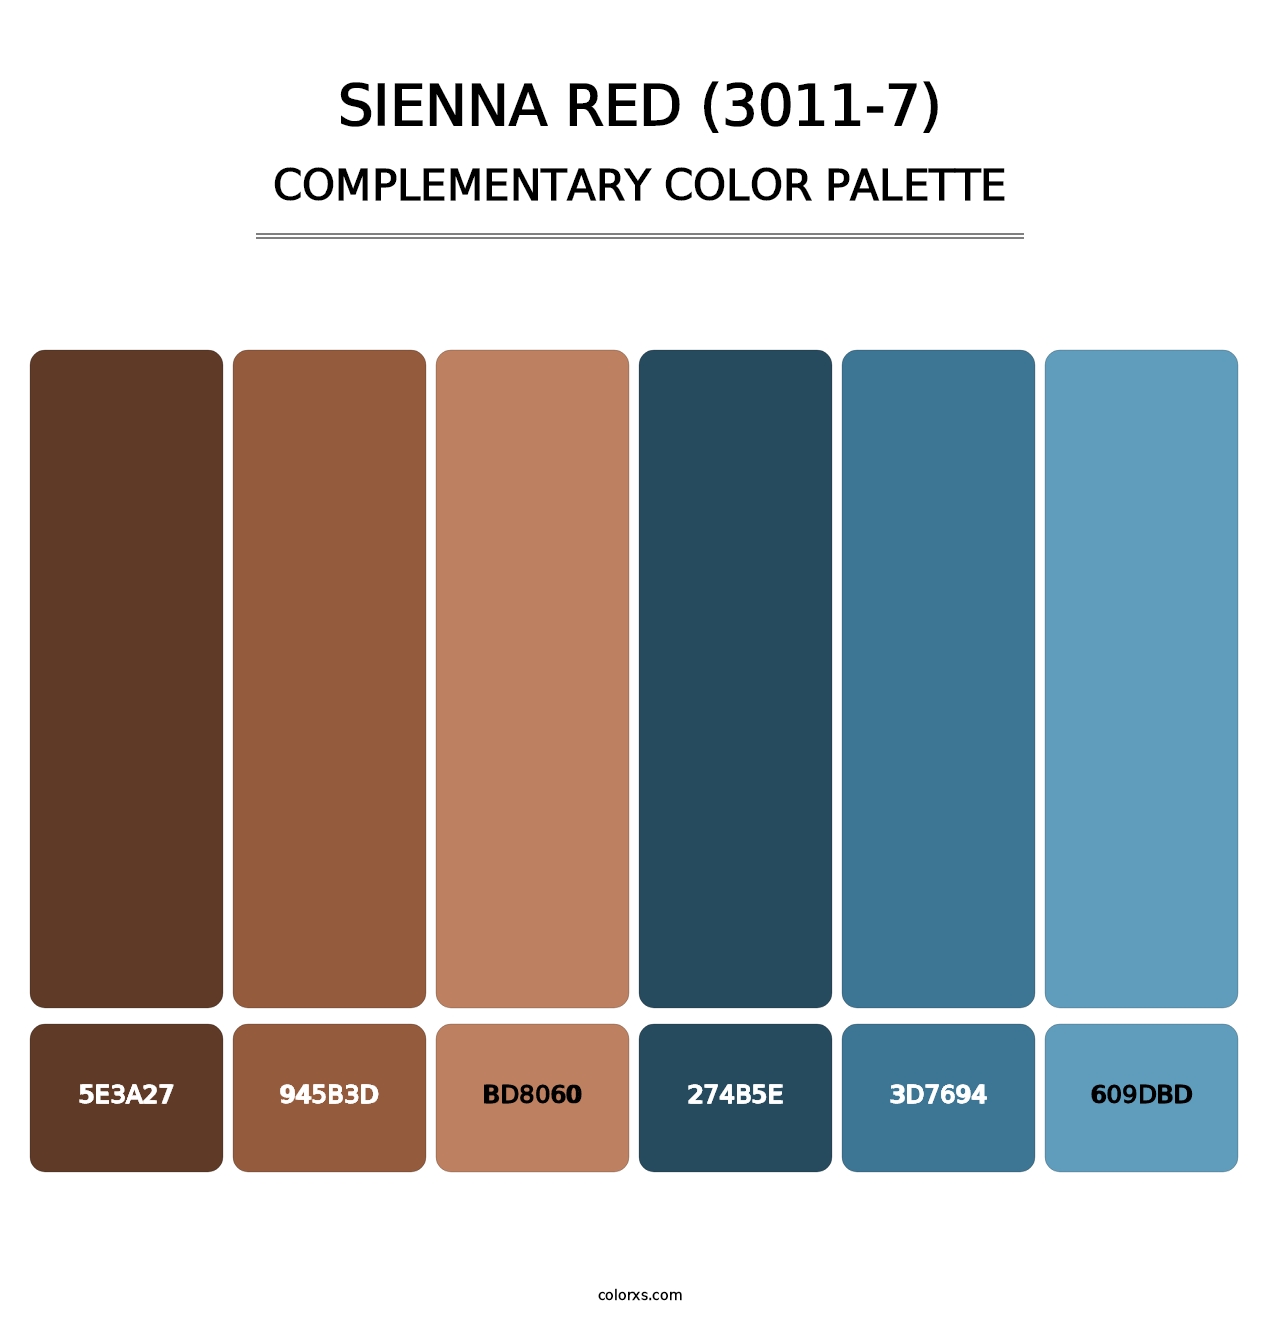 Sienna Red (3011-7) - Complementary Color Palette